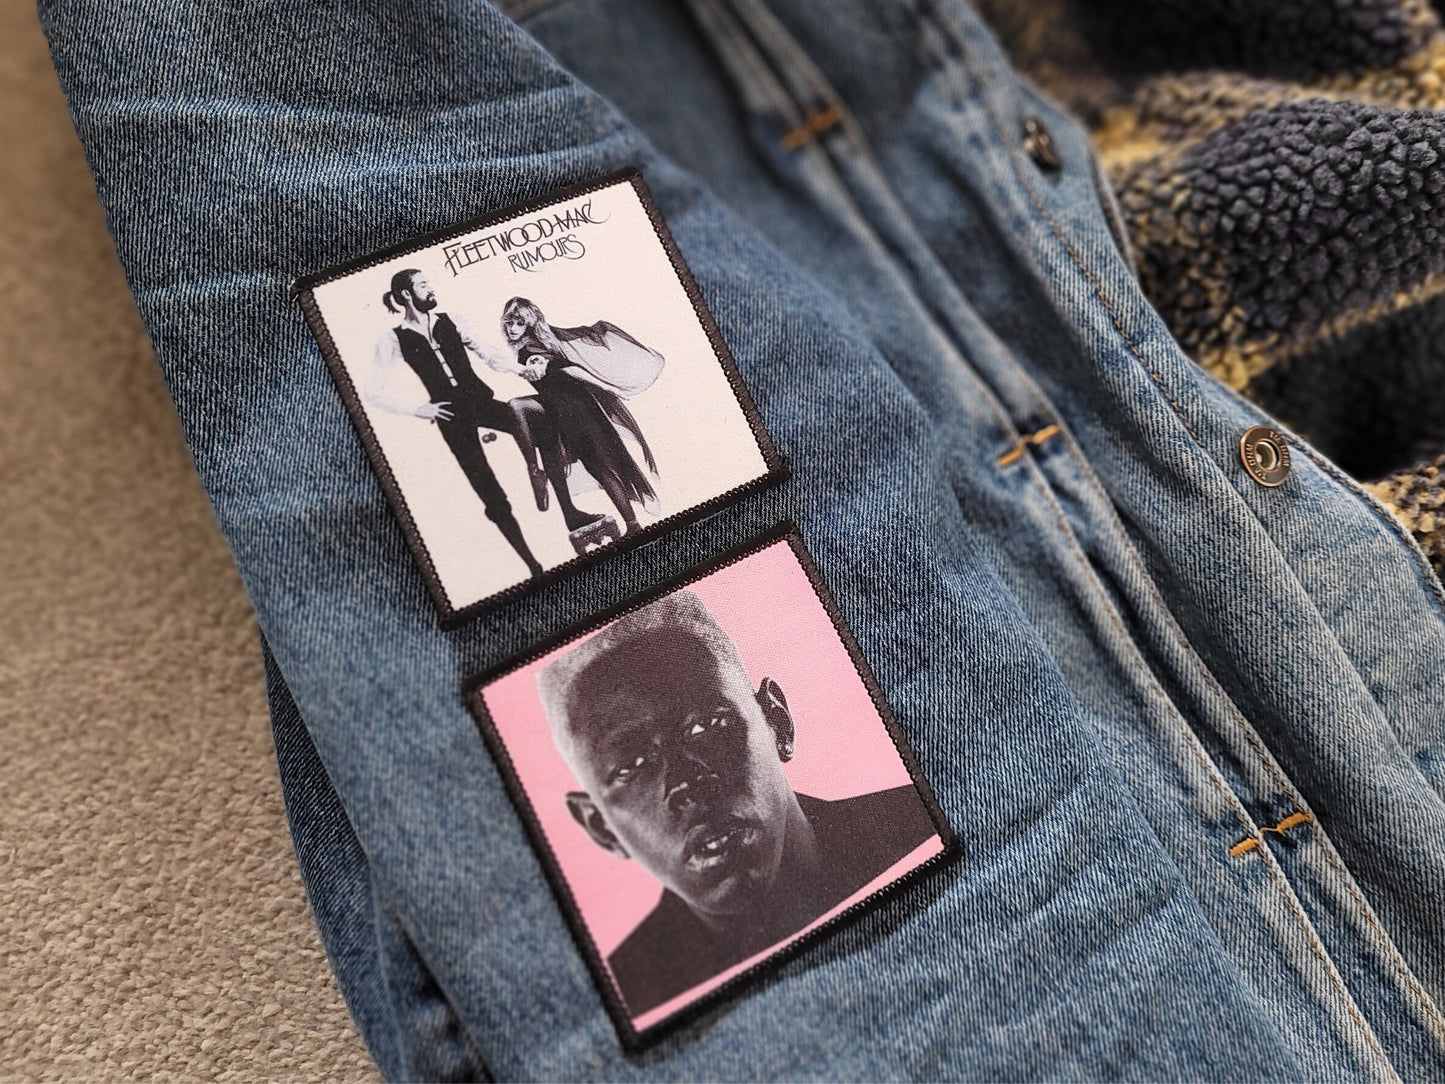 Custom Album Square Sew-on Fabric Patch Badges, Perfect For Sewing Onto Clothing, Any Album You Like As Sew-on Patch, Battle Jacket Ideas